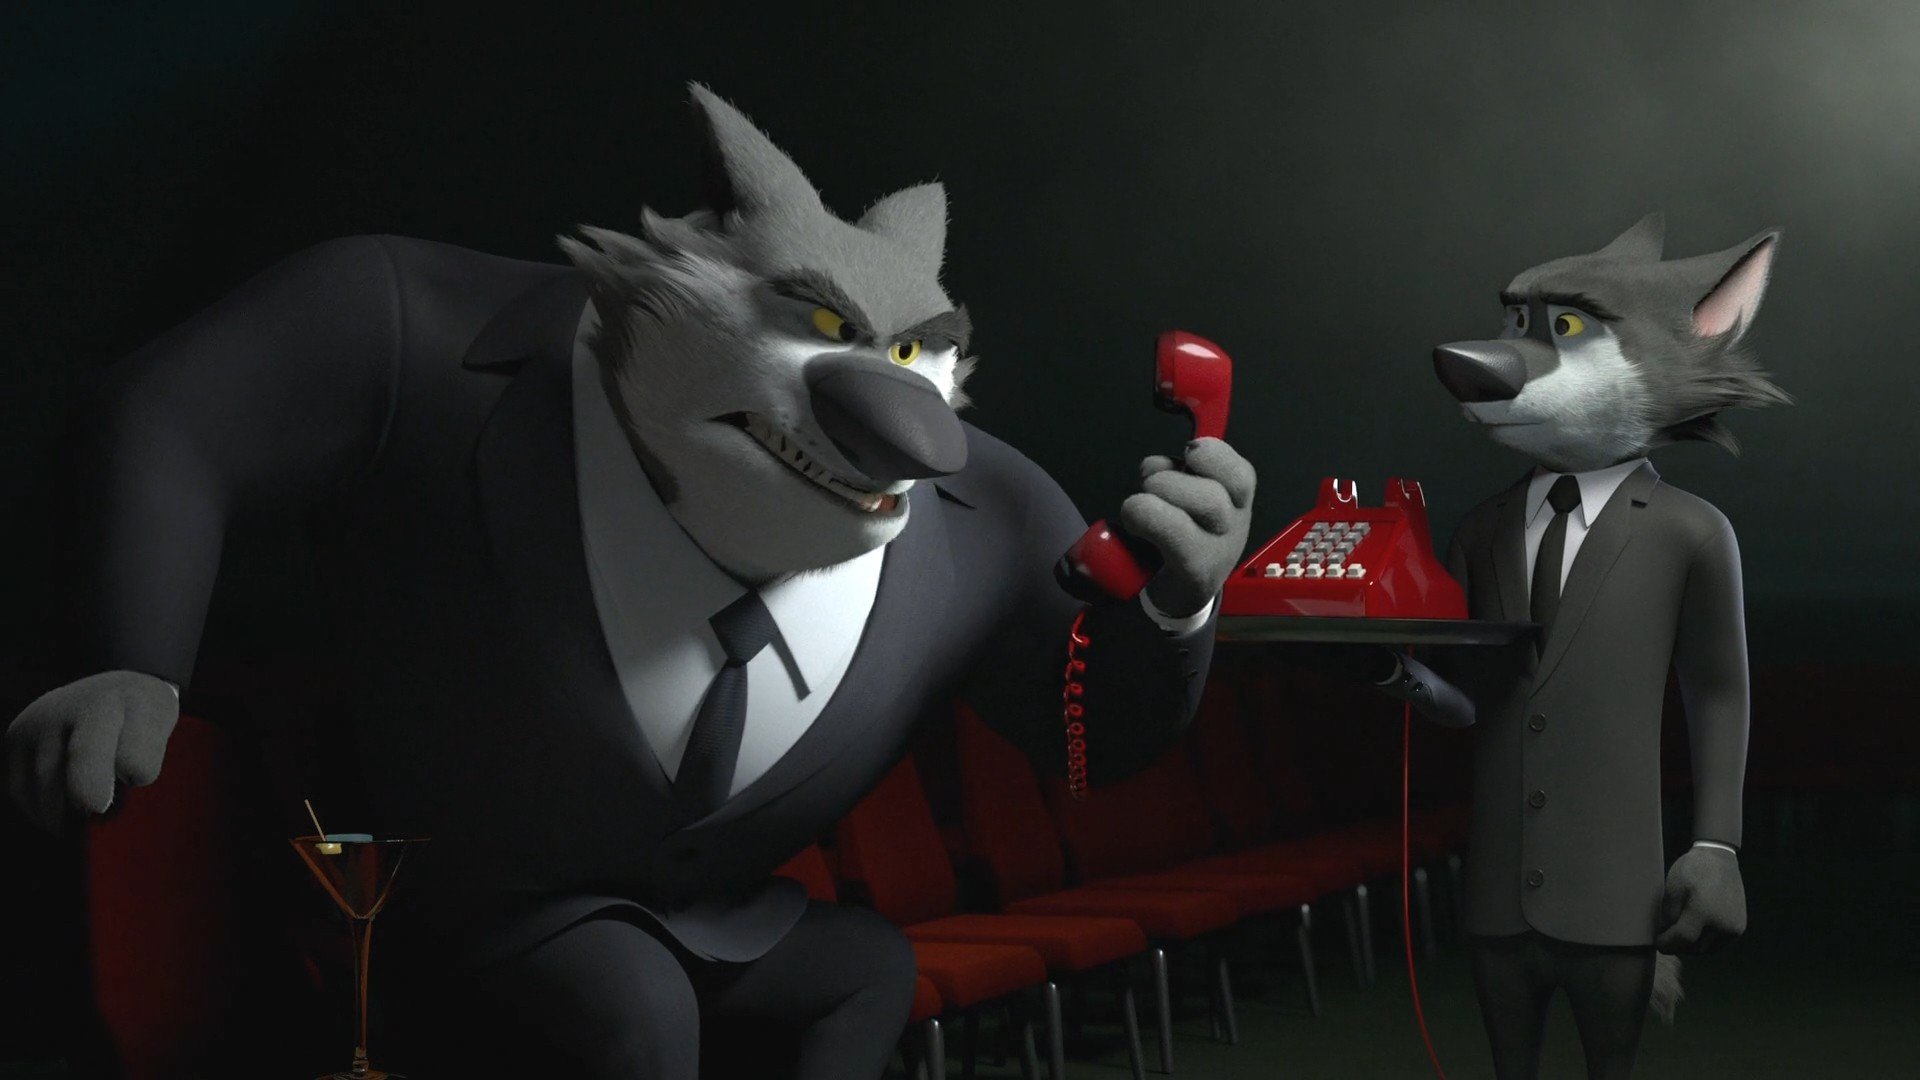 Anthro, Gangsters, Gangster, Rock Dog, Wolf, Animals, 3D, Cartoon, Movies, Clothing, Suits, Tie, Telephone, Drinking glass, Chair, Screen shot, Screengrab Wallpaper